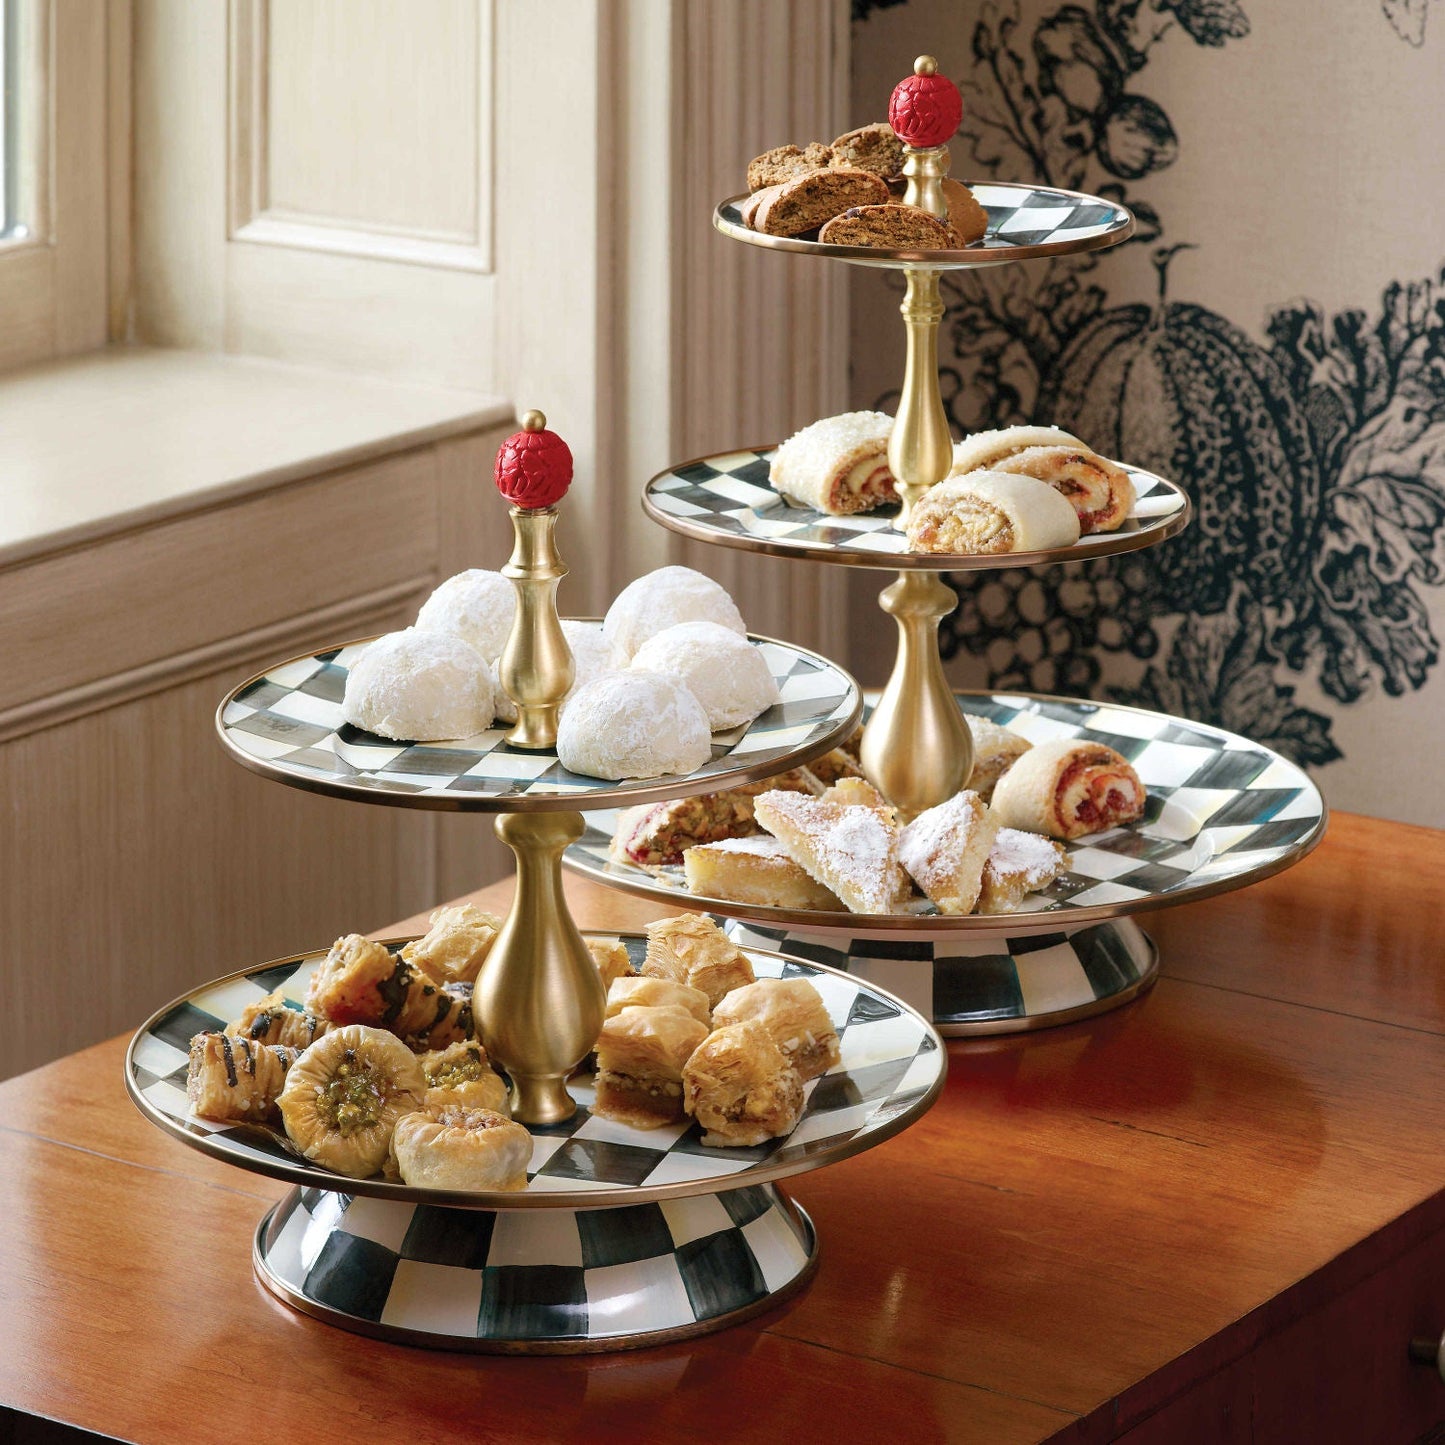 Courtly Check Enamel Three Tier Sweet Stand - |VESIMI Design|